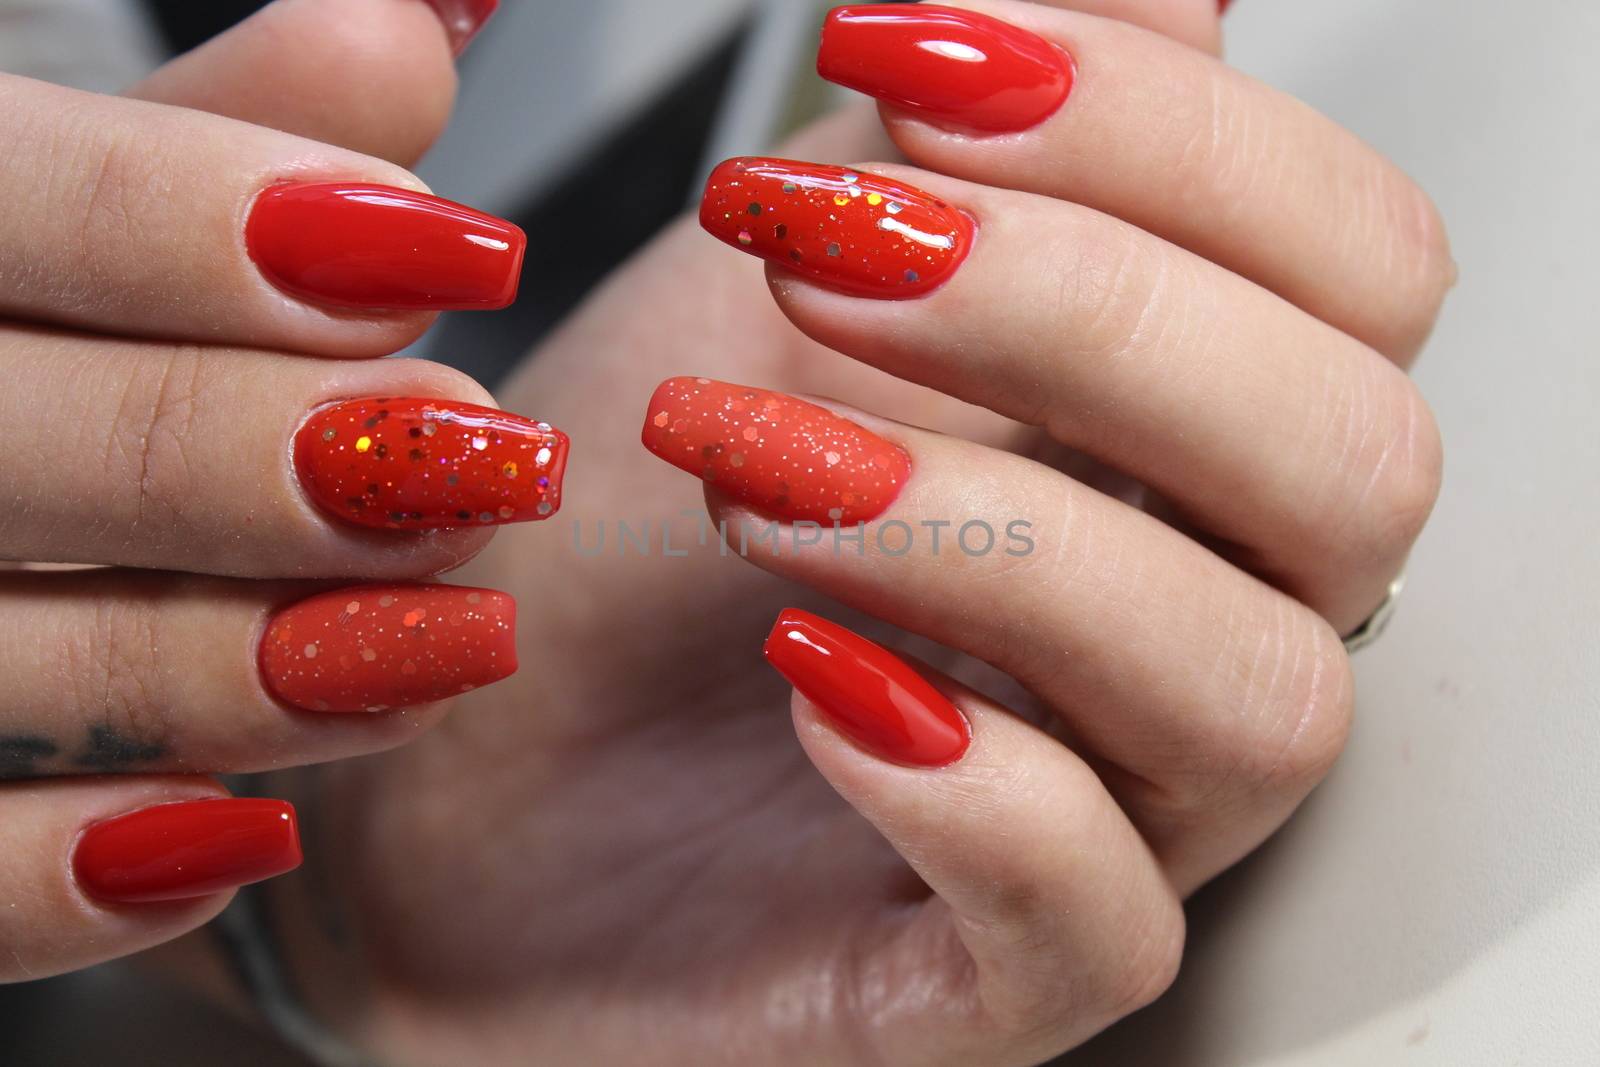 Long beautiful red nails by SmirMaxStock